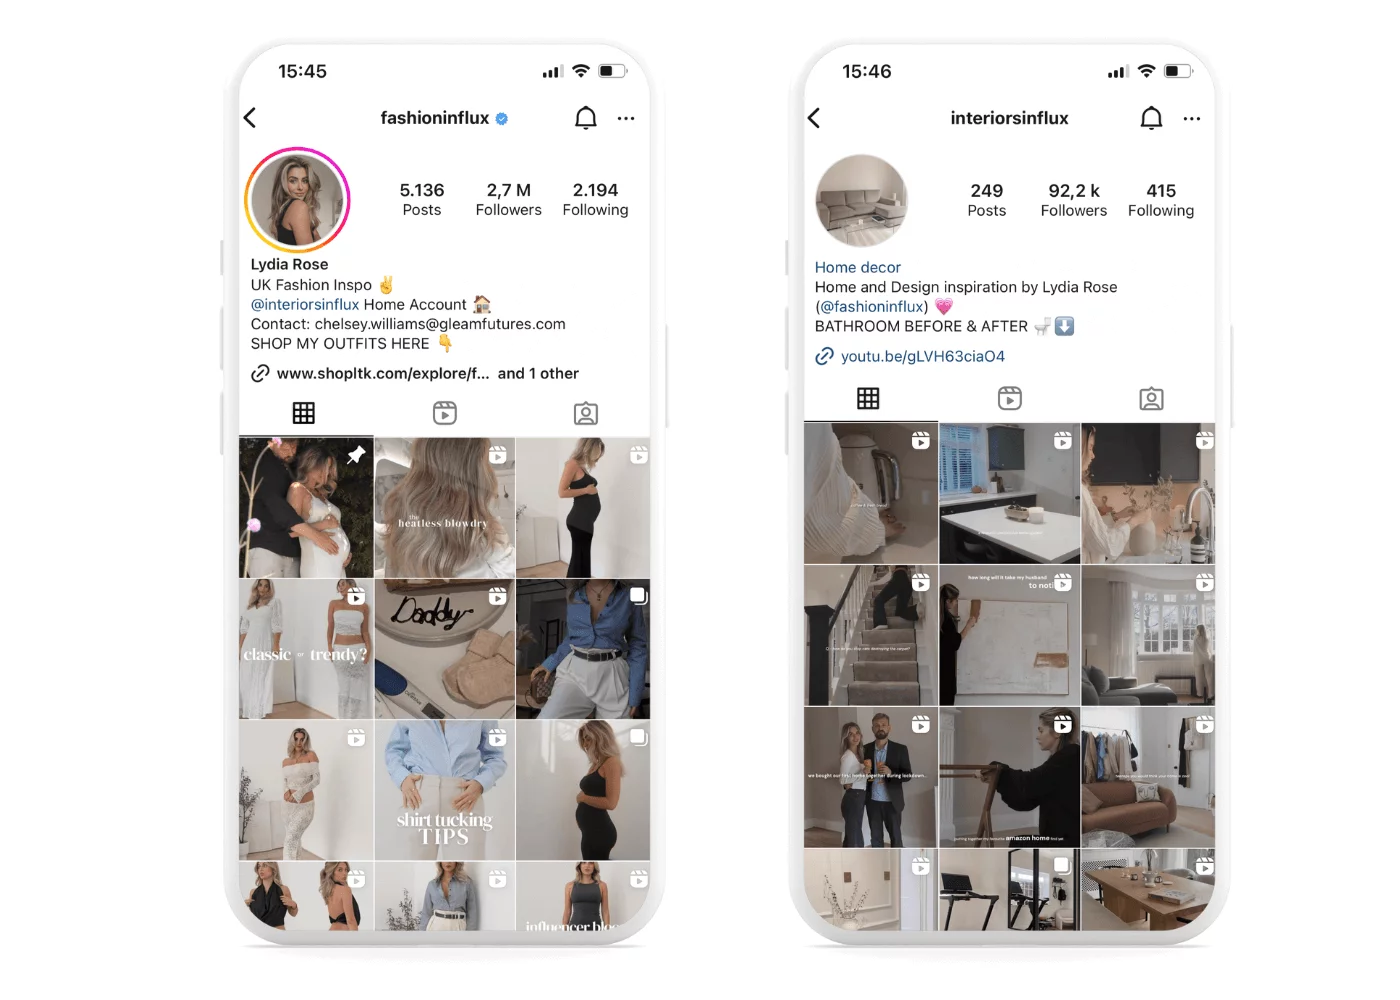 Screenshot of two Instagram feeds of fashioninflux and interiorinflux showing similarly created photos of different objects - clothes and interior designs.